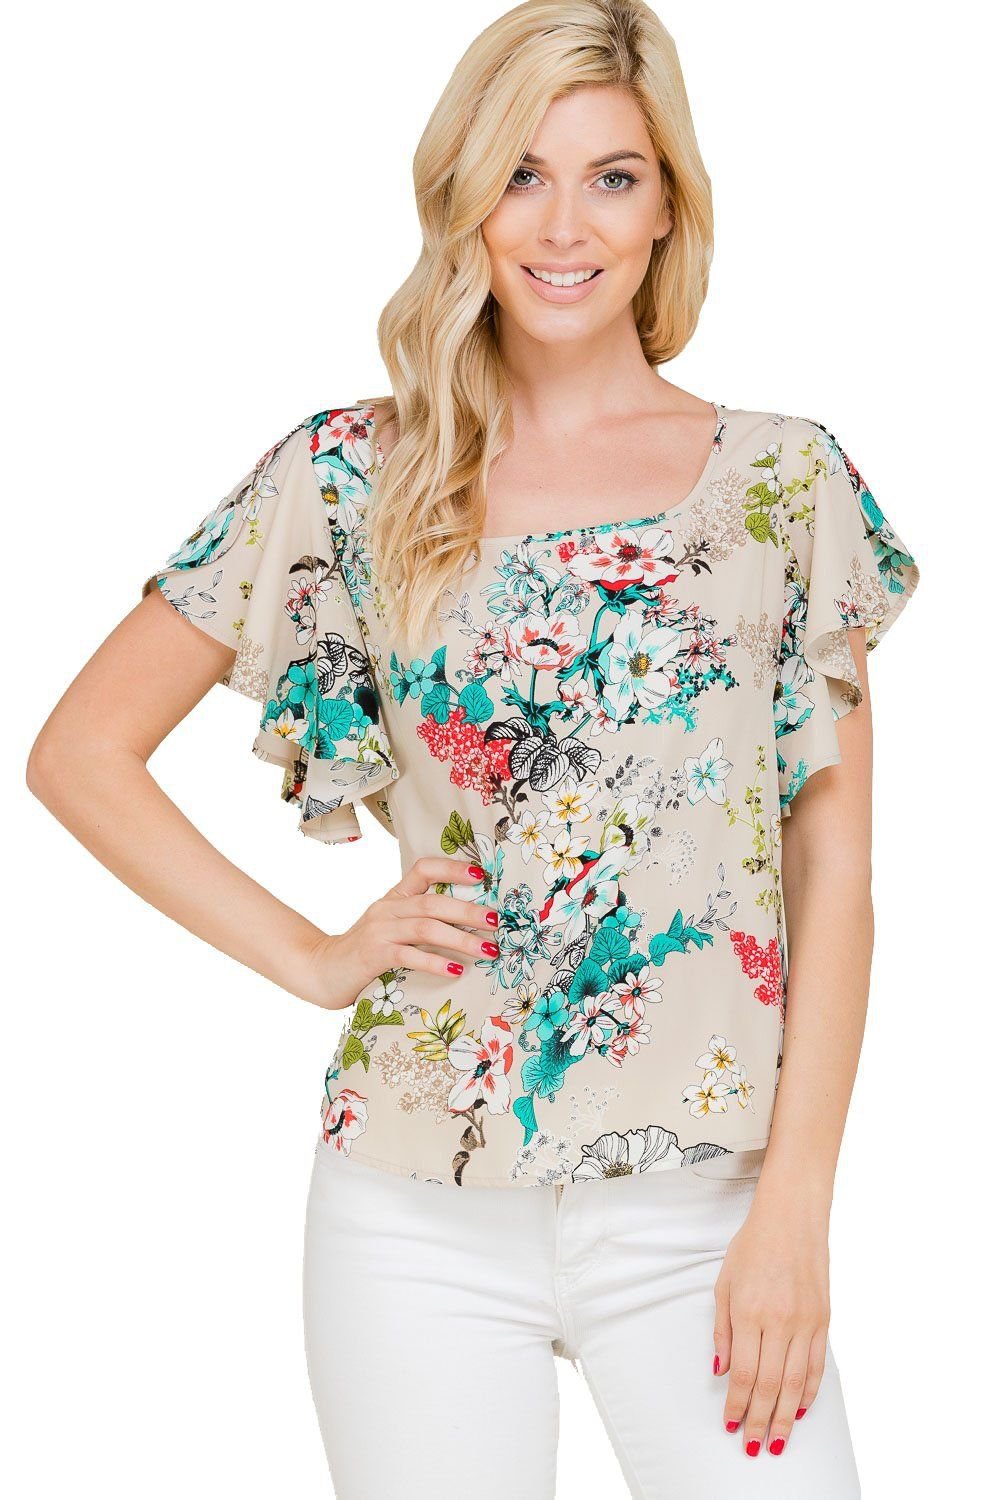 Wide Round Neck Floral Flounce Short Sleeves Blouse Top